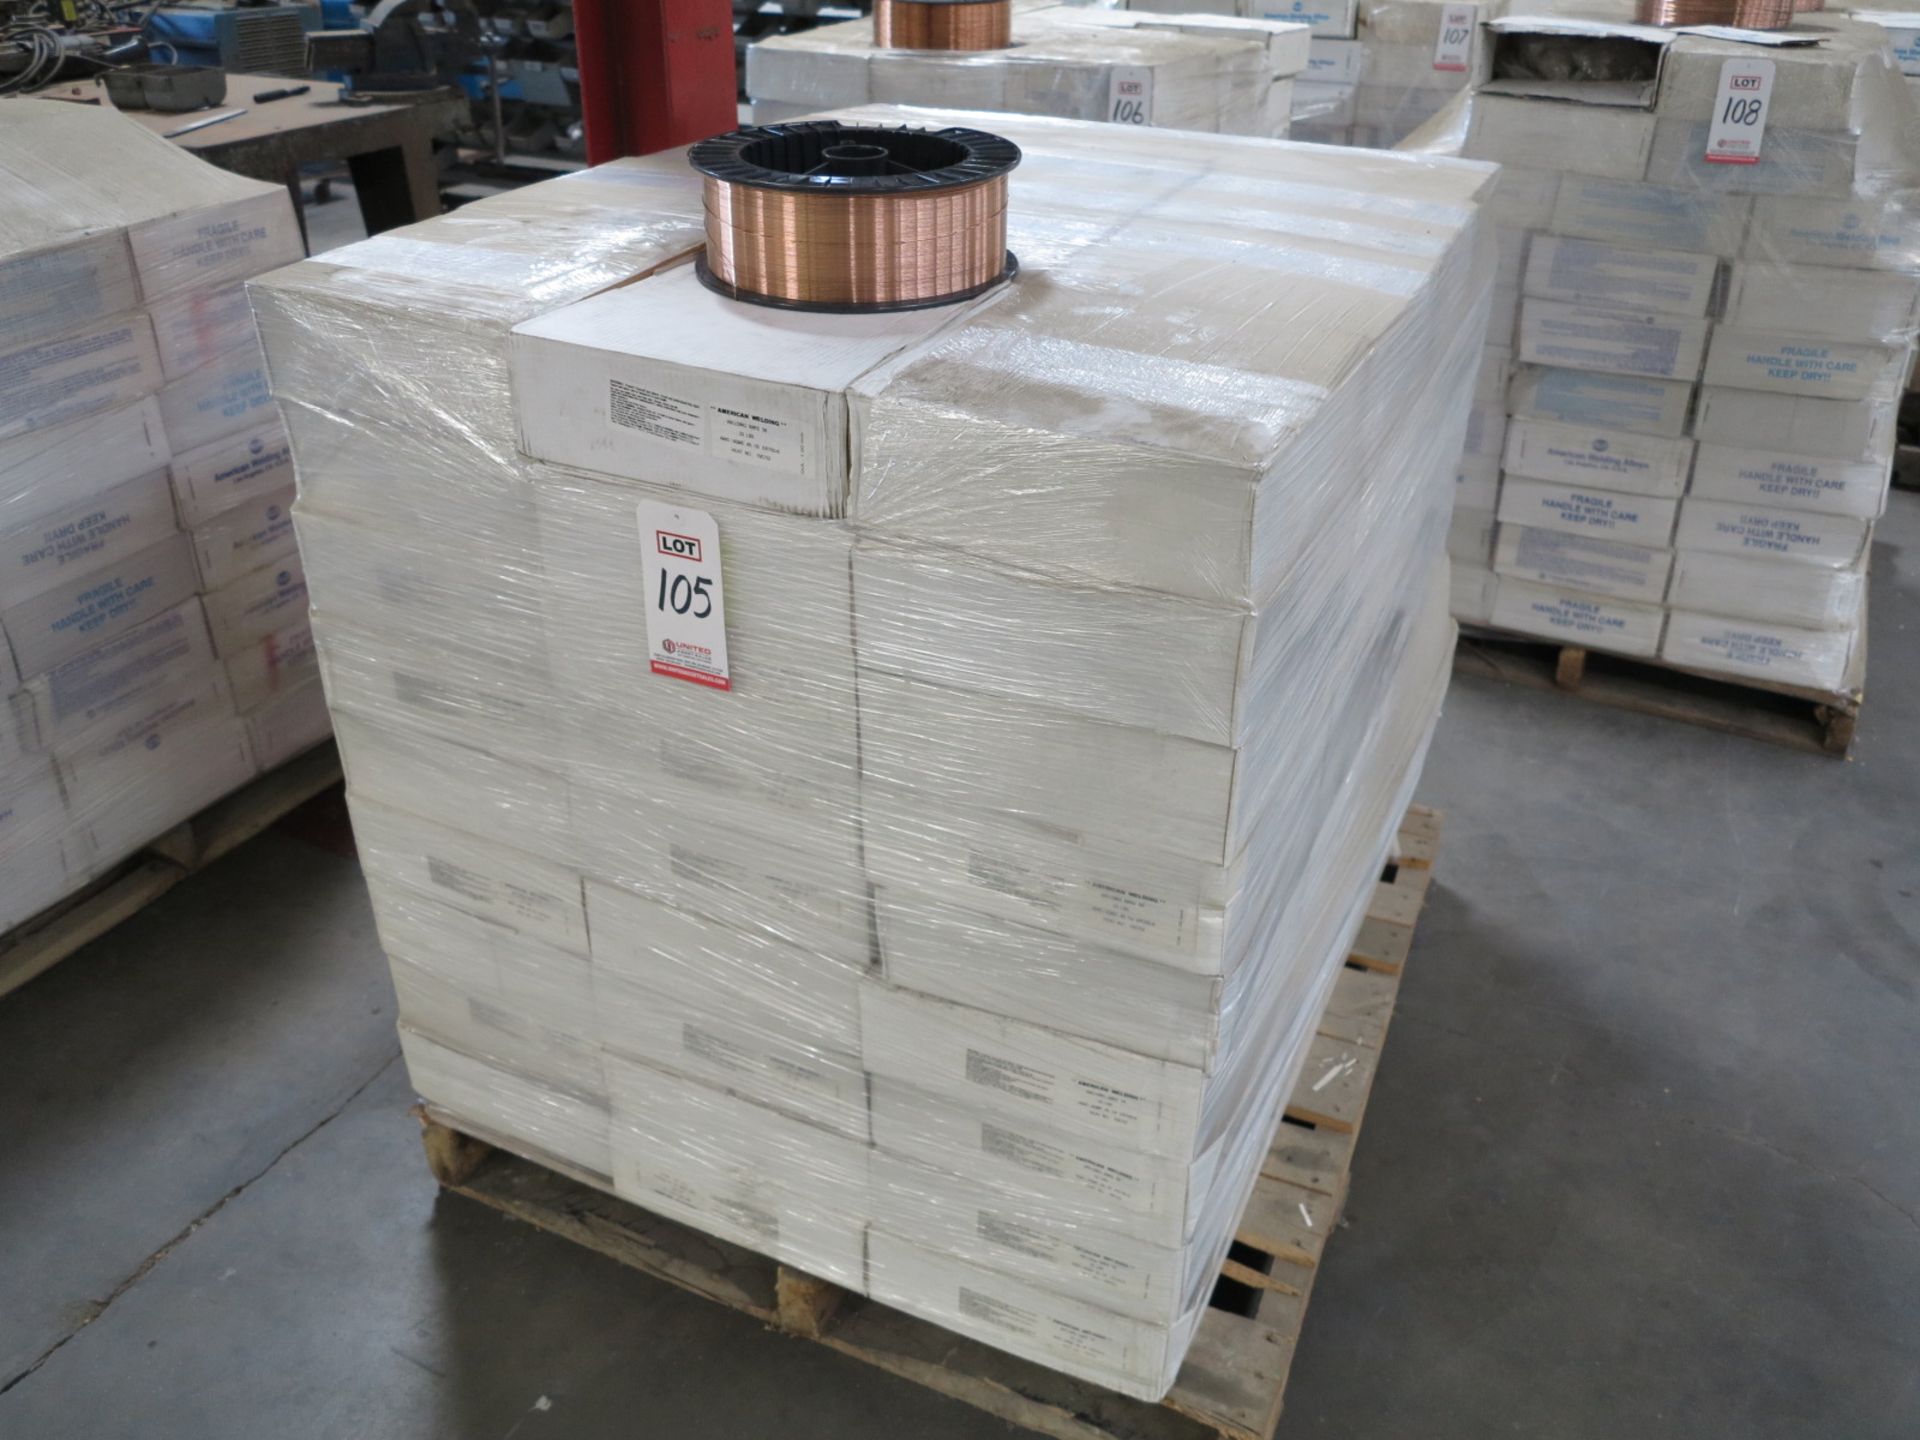 LOT - PALLET OF AMERICAN WELDING WIRE, S6, DIA. 1MM, 108 BOXES